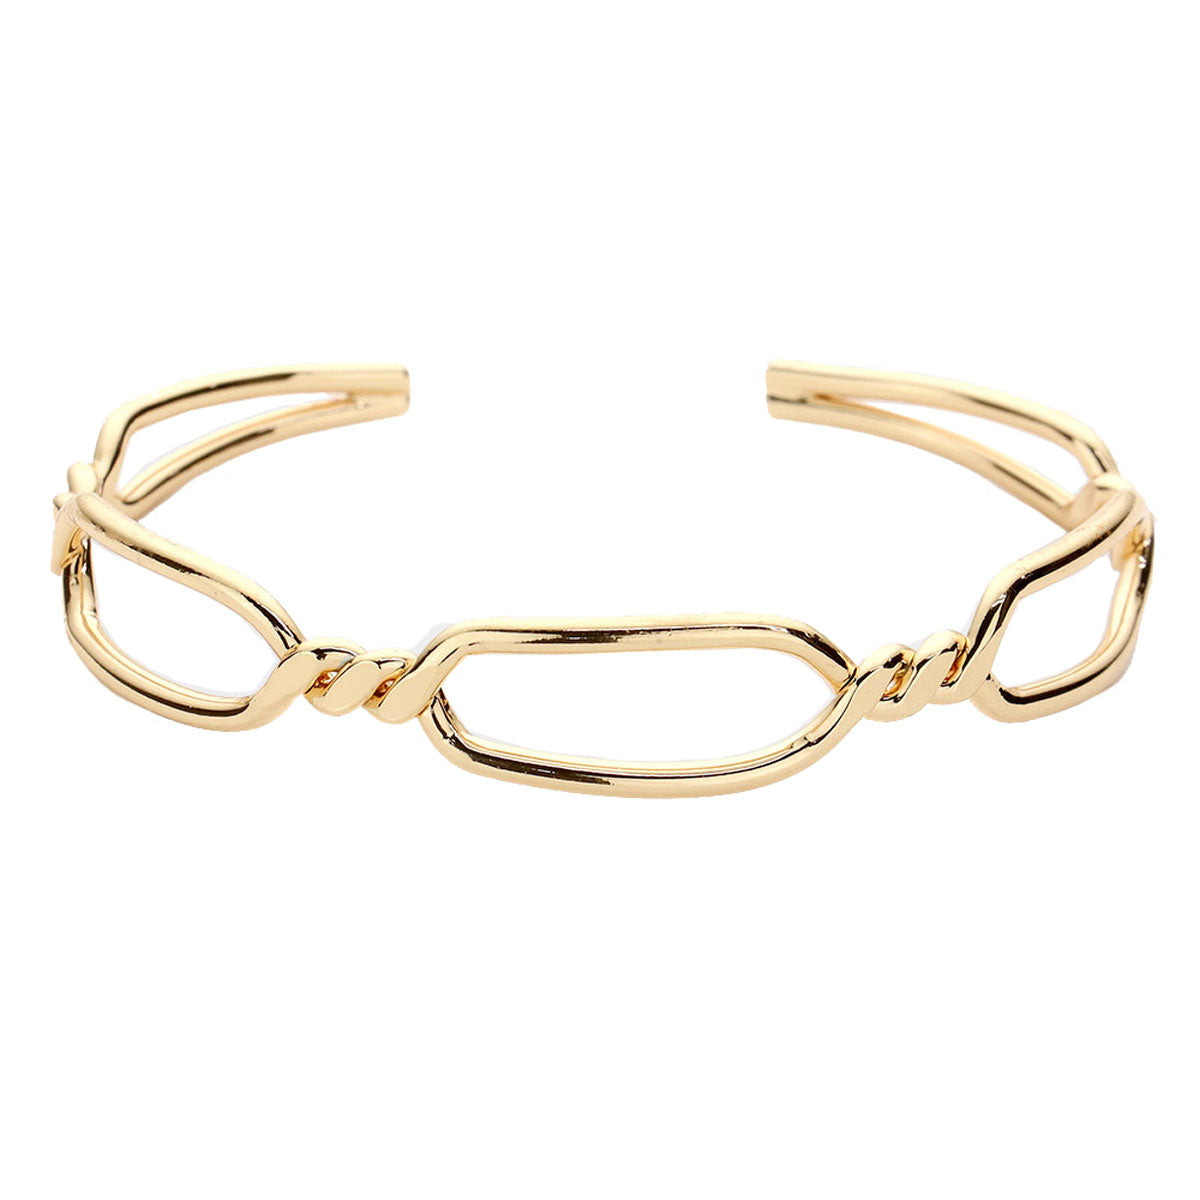 Gold Twisted Brass Metal Open Hexagon Cuff Braceletwear with your favorite tops & dresses all year round! Metal Cuff is versatile, goes with practically anything! Birthday Gift, Christmas Gift, Anniversary Gift, Regalo Navidad, Regalo Cumpleanos, Regalo Dia del Amor, Valentine's Day Gift, Mother's Day Gift, Regalo Dia Madre